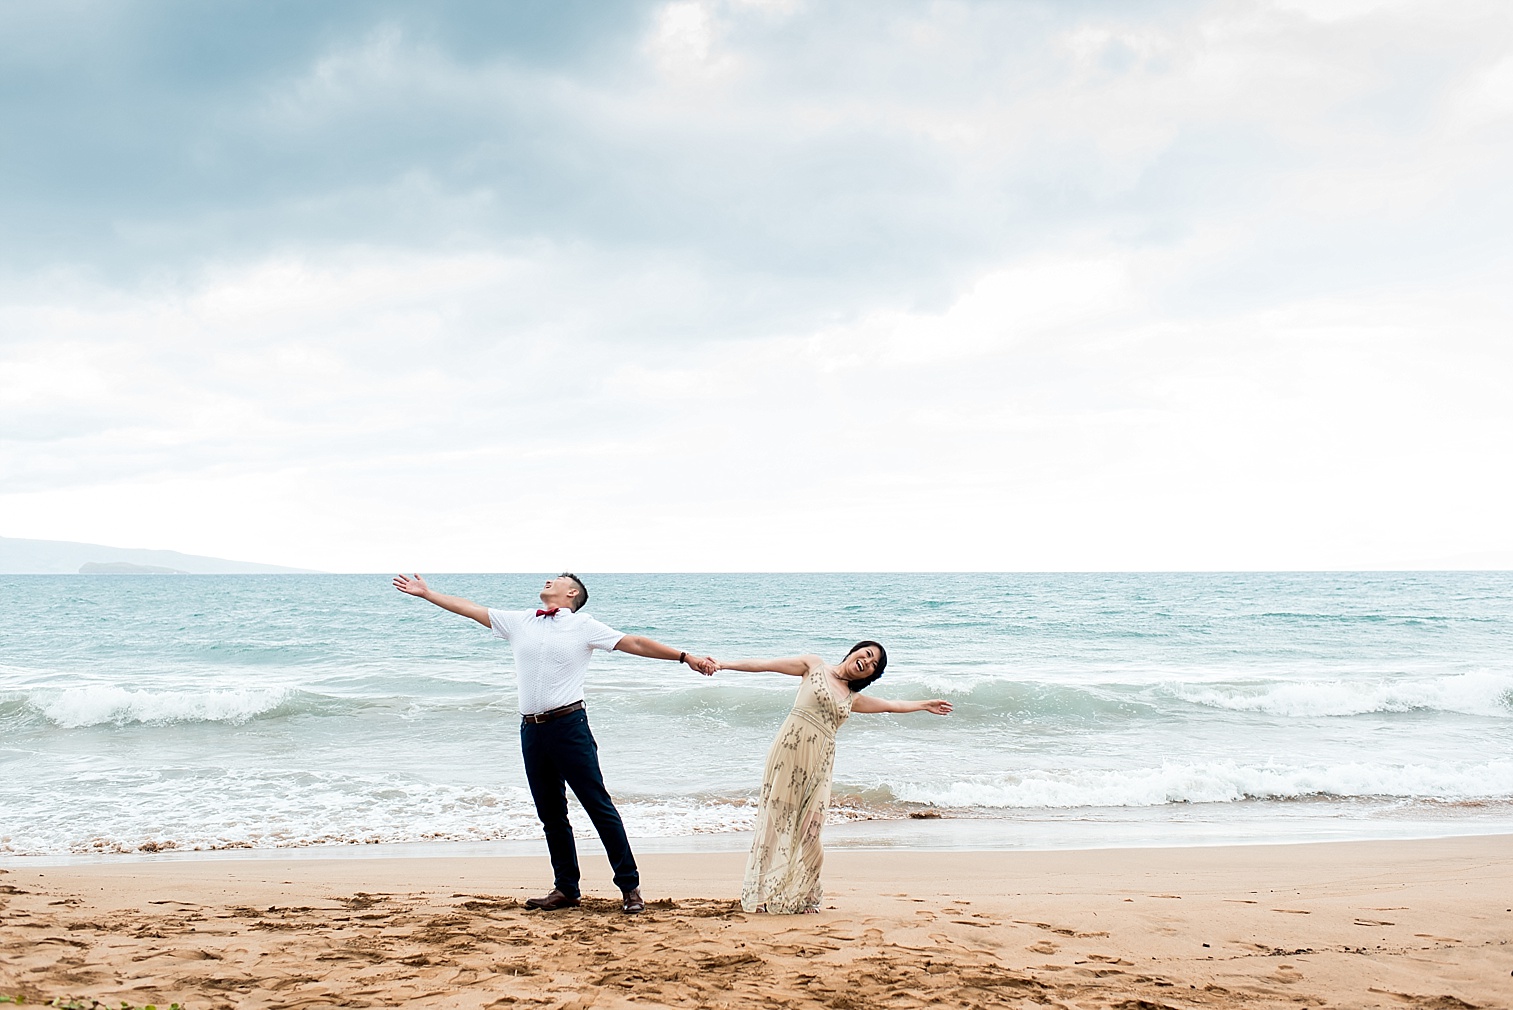 Maui wedding of Lee and Jung at Gannon's Wailea by Maui photographers Mariah Milan